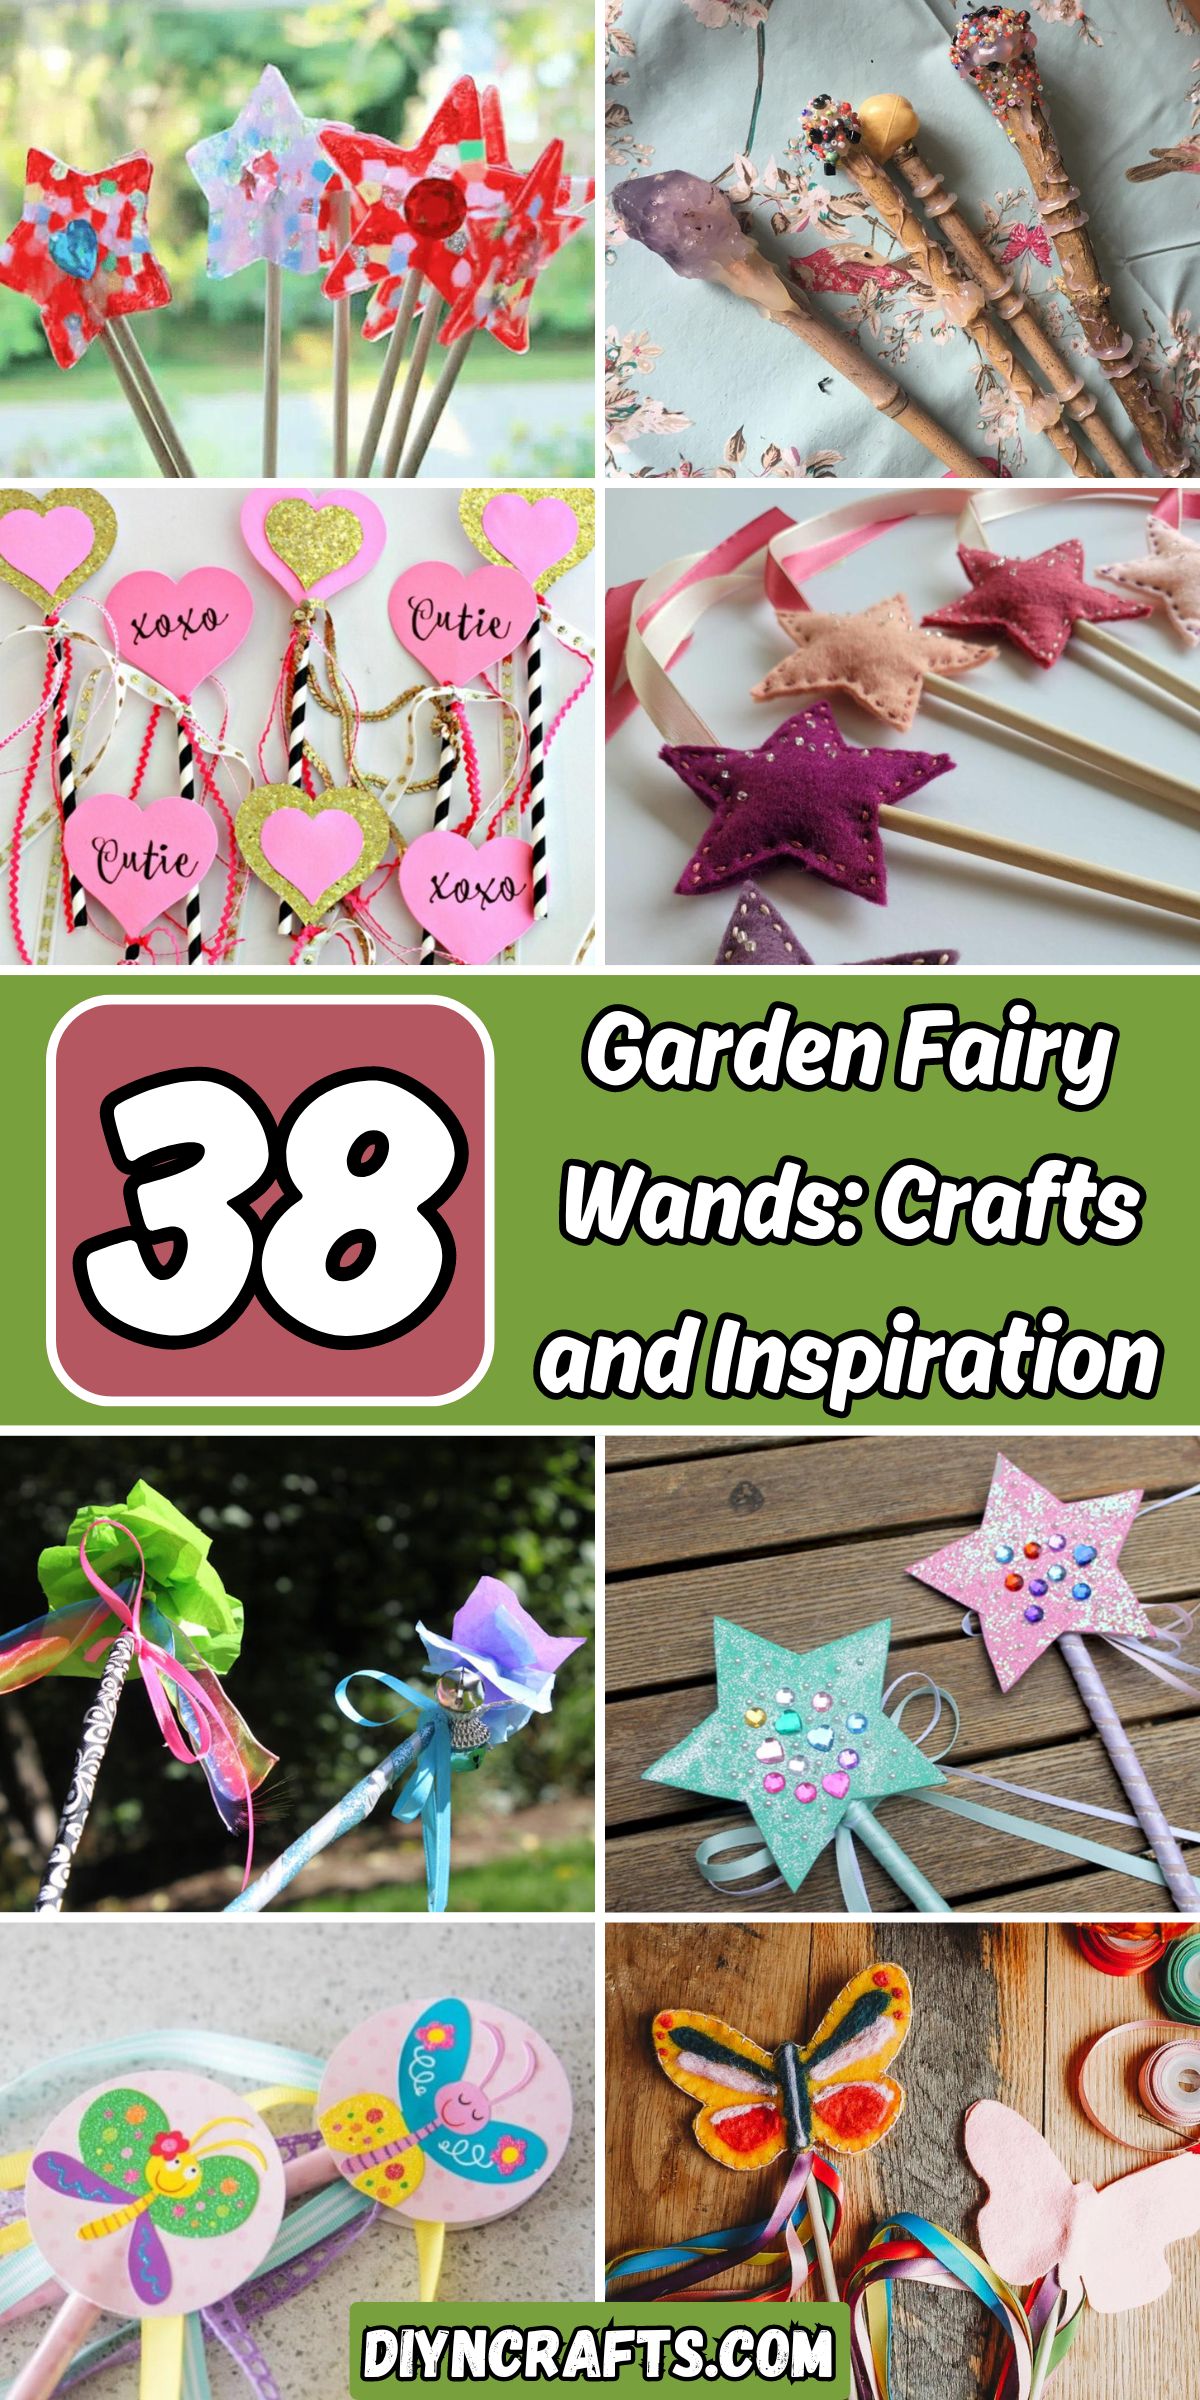 38 Garden Fairy Wands: Crafts and Inspiration collage.